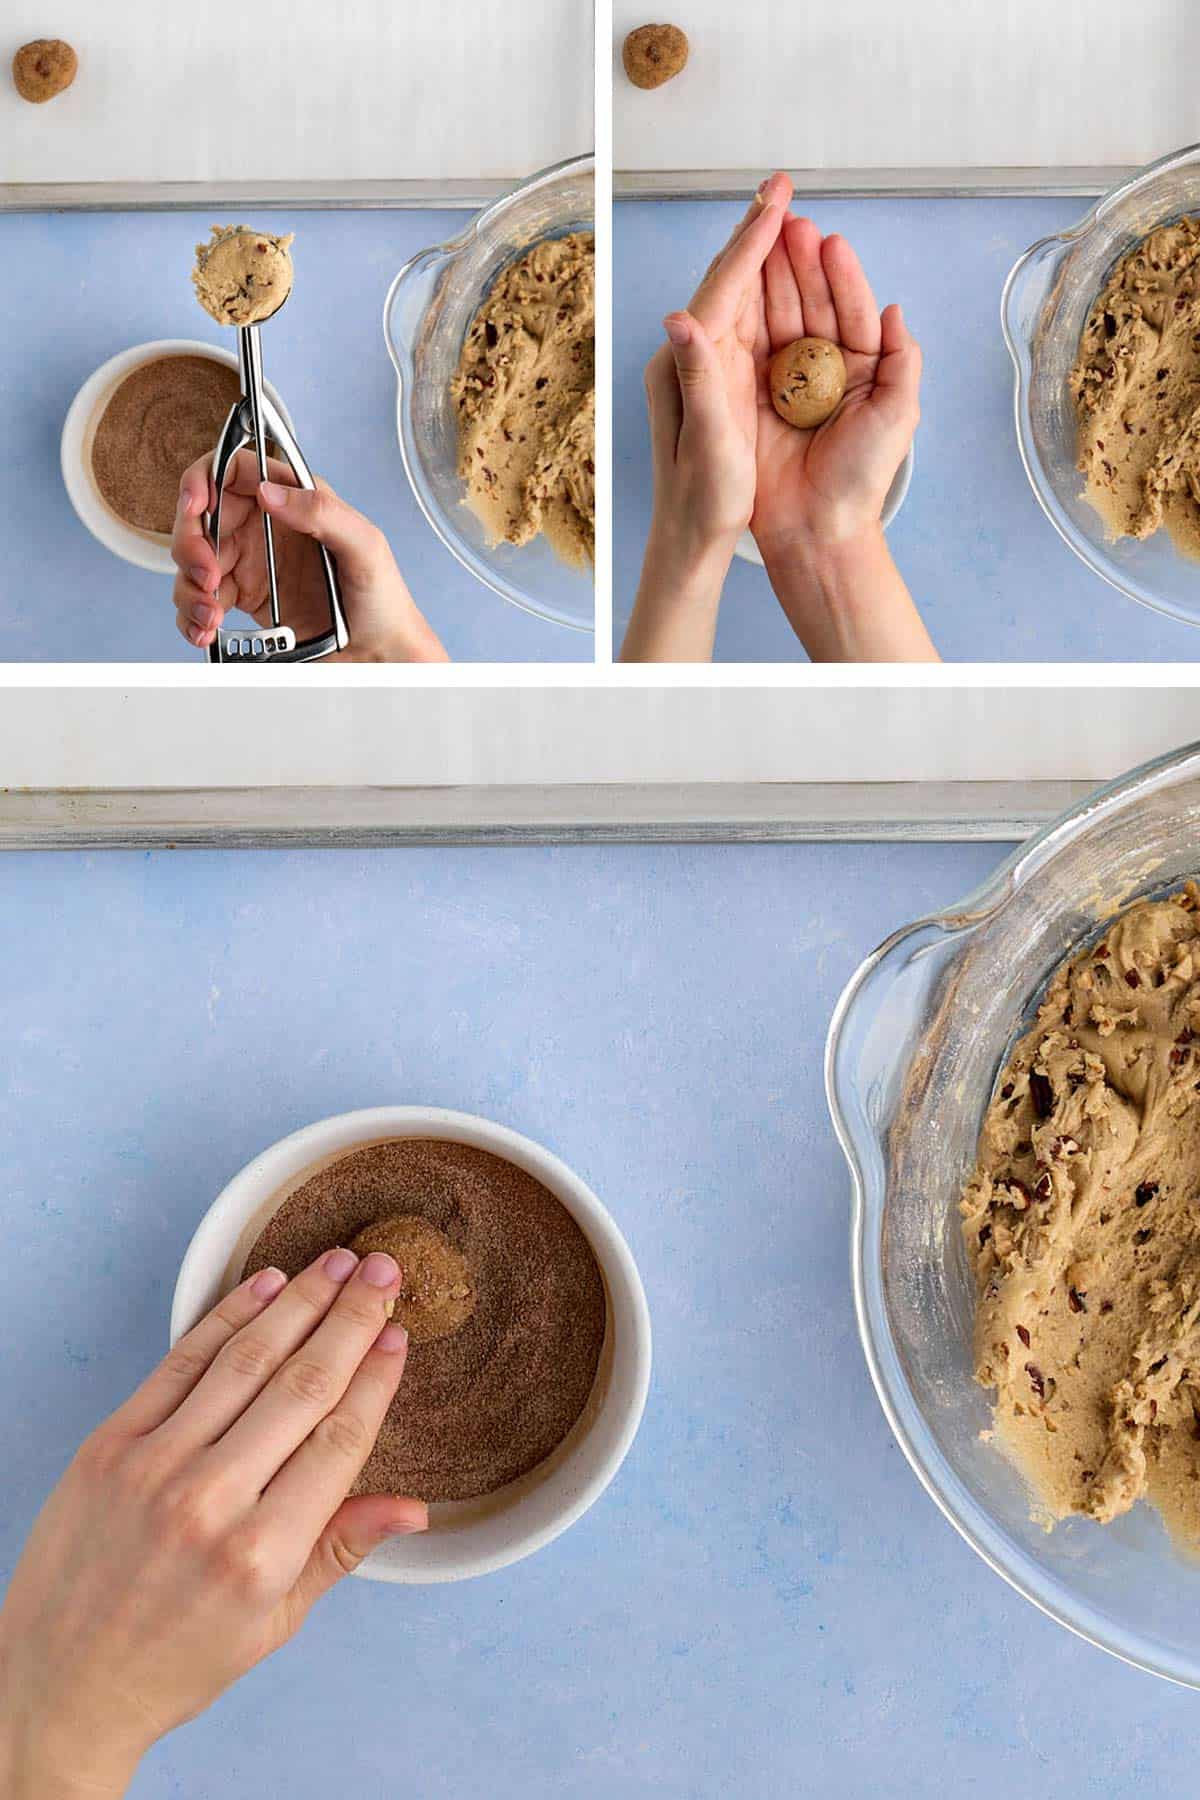 Step-by-step scooping the cookie dough, rolling it into a smooth ball, and rolling it in the cinnamon sugar mixture.